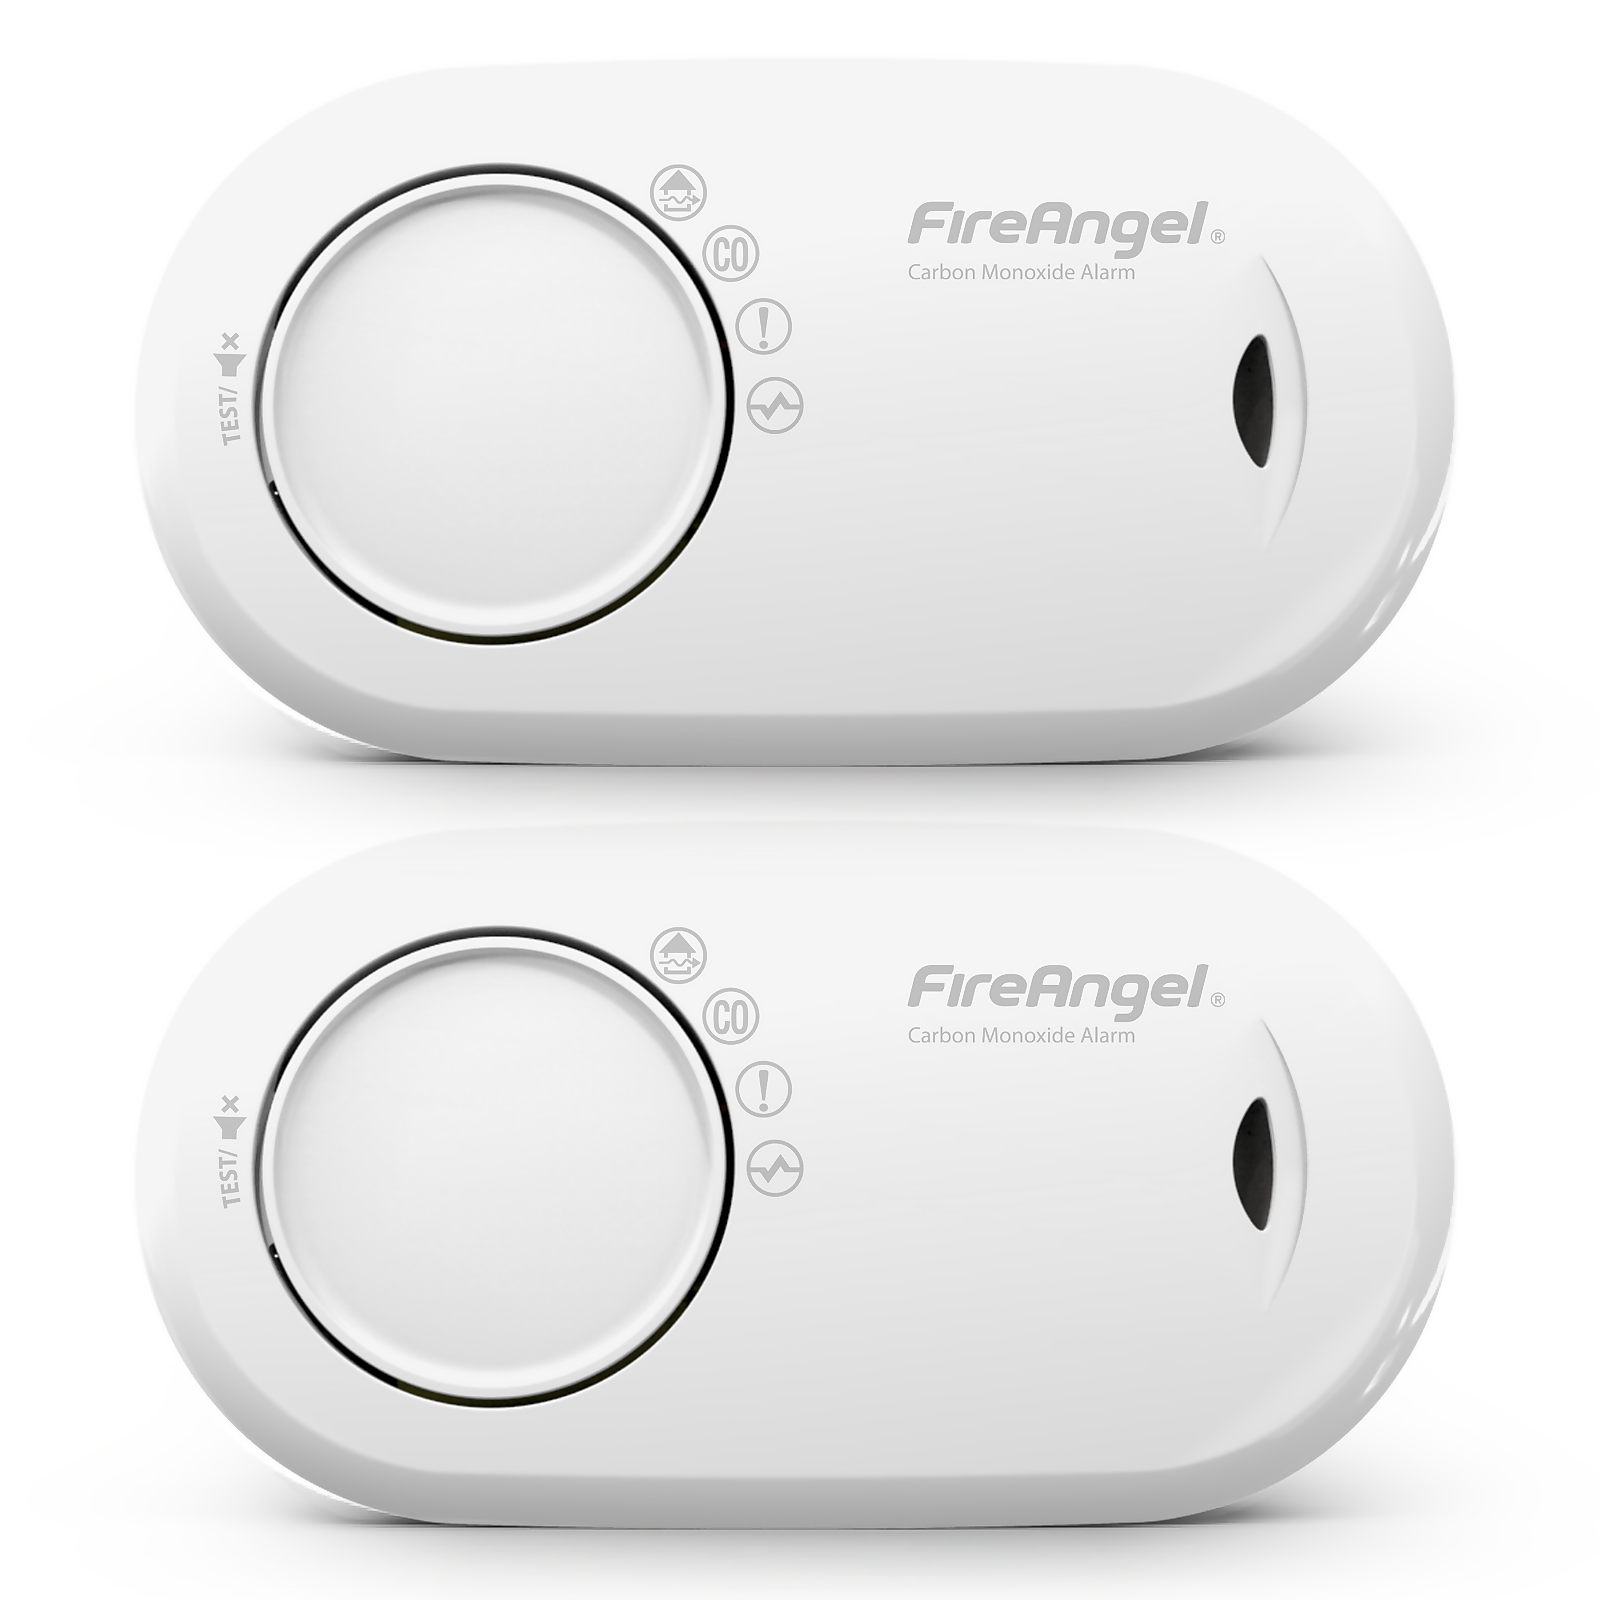 FireAngel Carbon Monoxide Alarm with 10 Year Sealed For Life Battery - Twin Pack